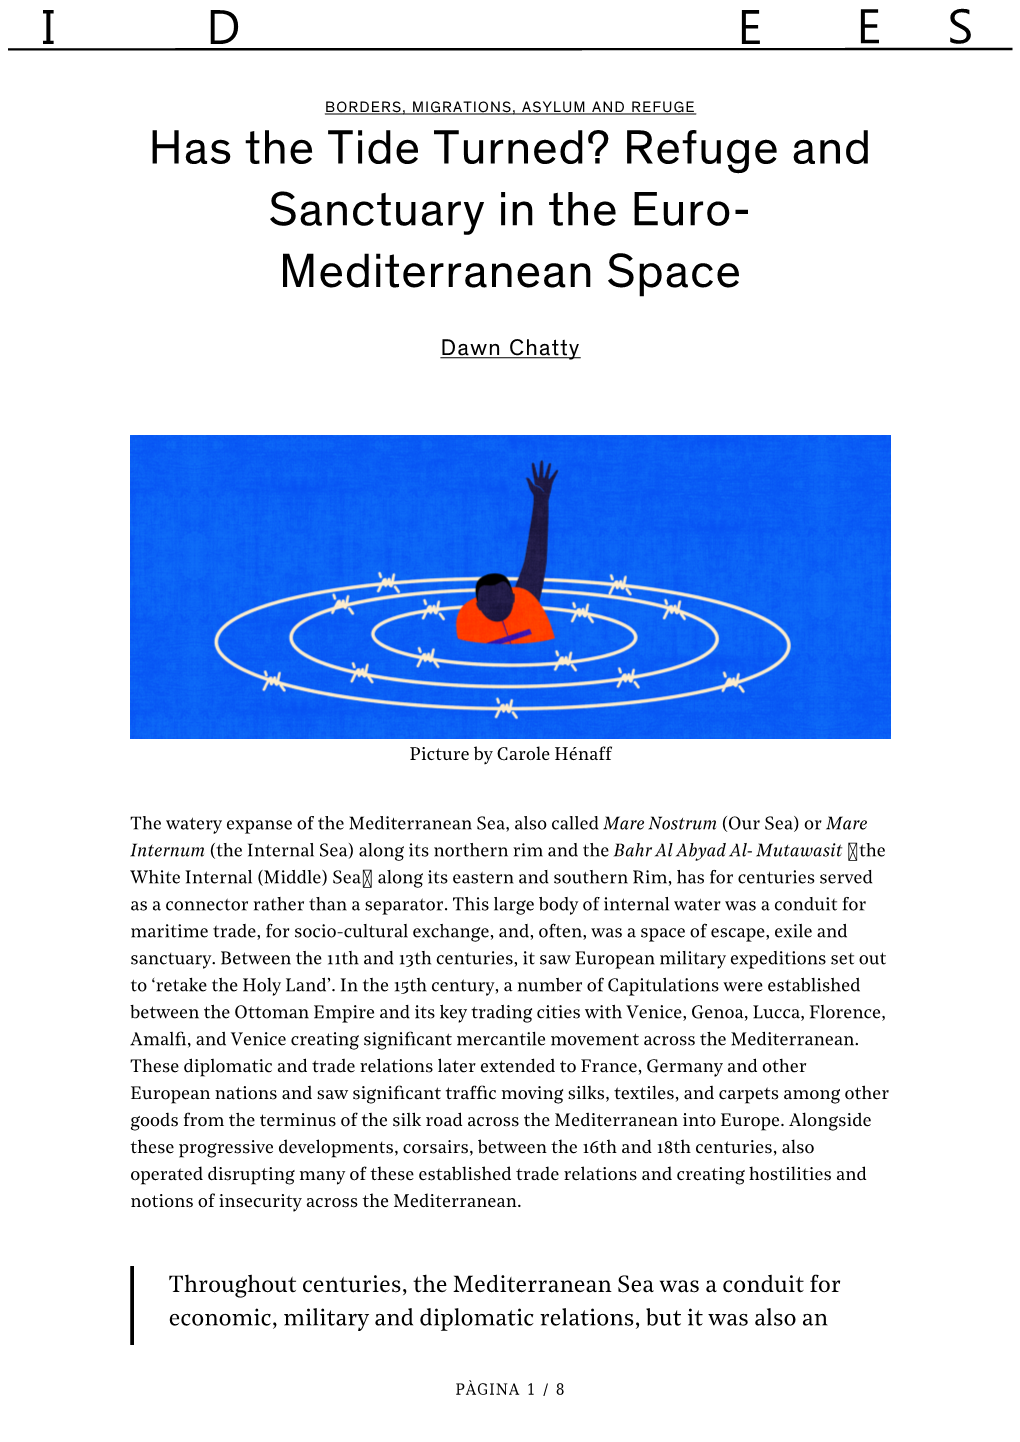 Has the Tide Turned? Refuge and Sanctuary in the Euro- Mediterranean Space